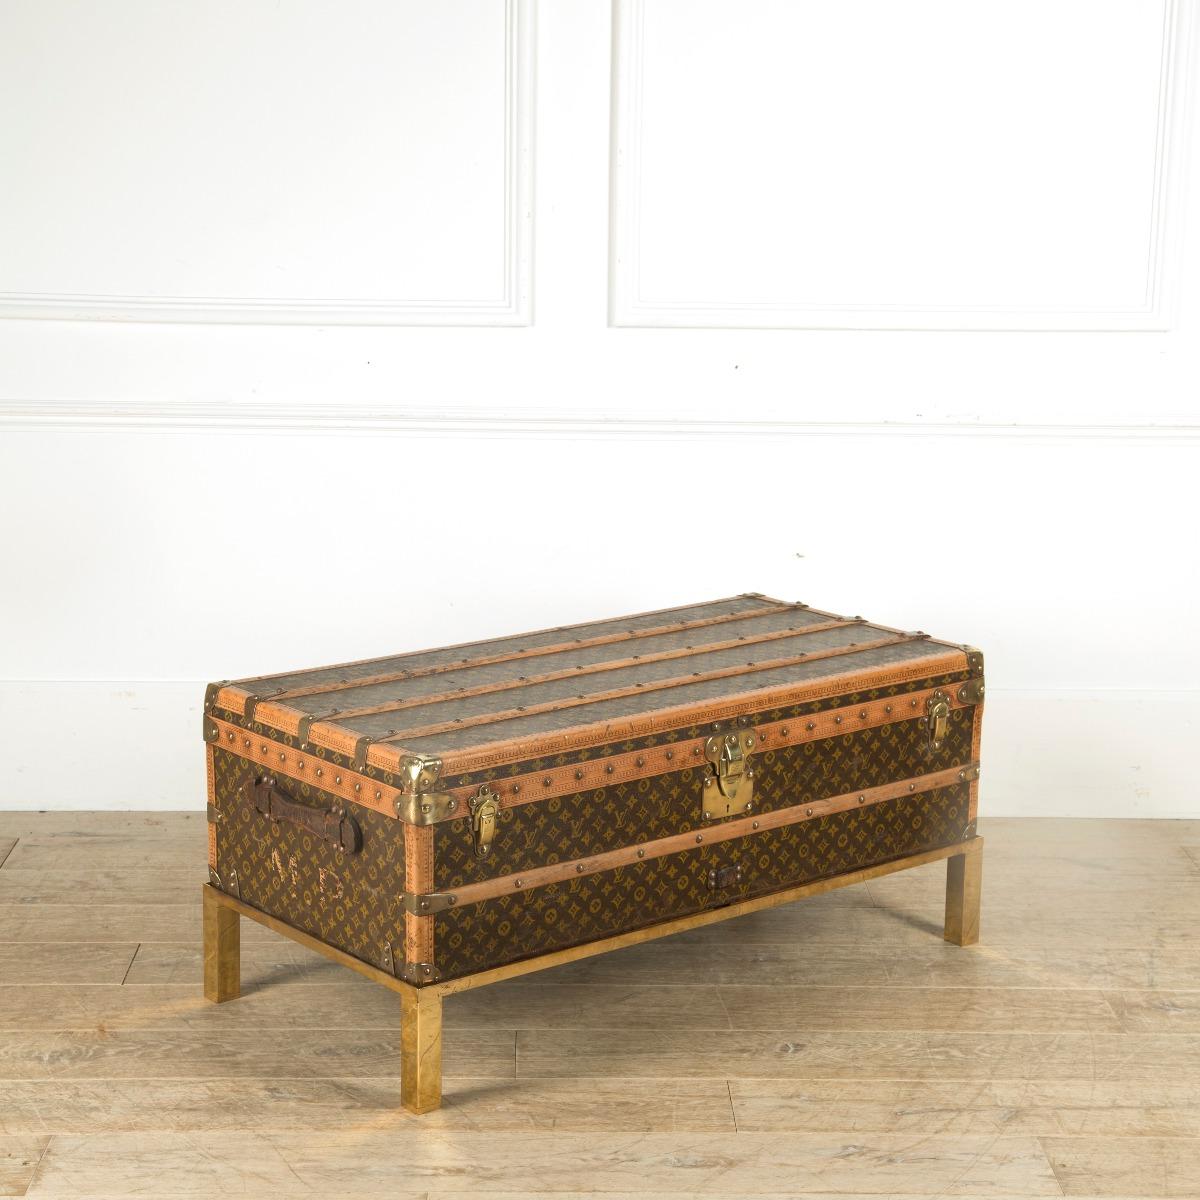 An immaculate 1930s Louis Vuitton cabin steamer trunk. In excellent condition retaining its original tray and label. Now sitting on a solid brass custom made stand, ideal coffee table height.